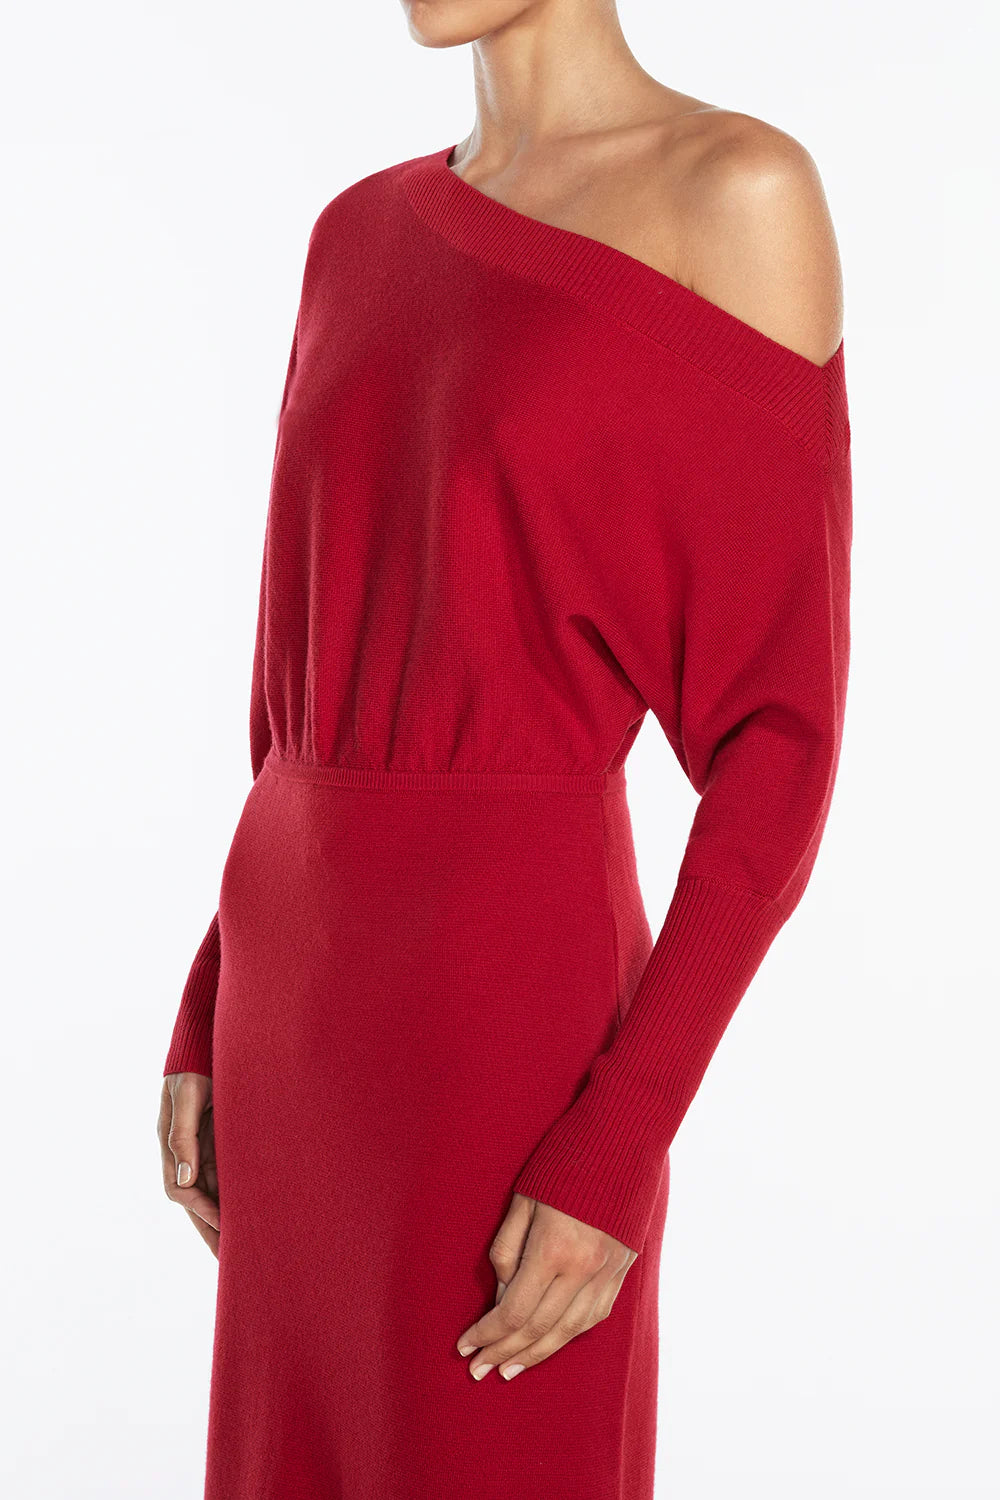 *PREORDER* ENERGY SHIFT KNIT DRESS - RED